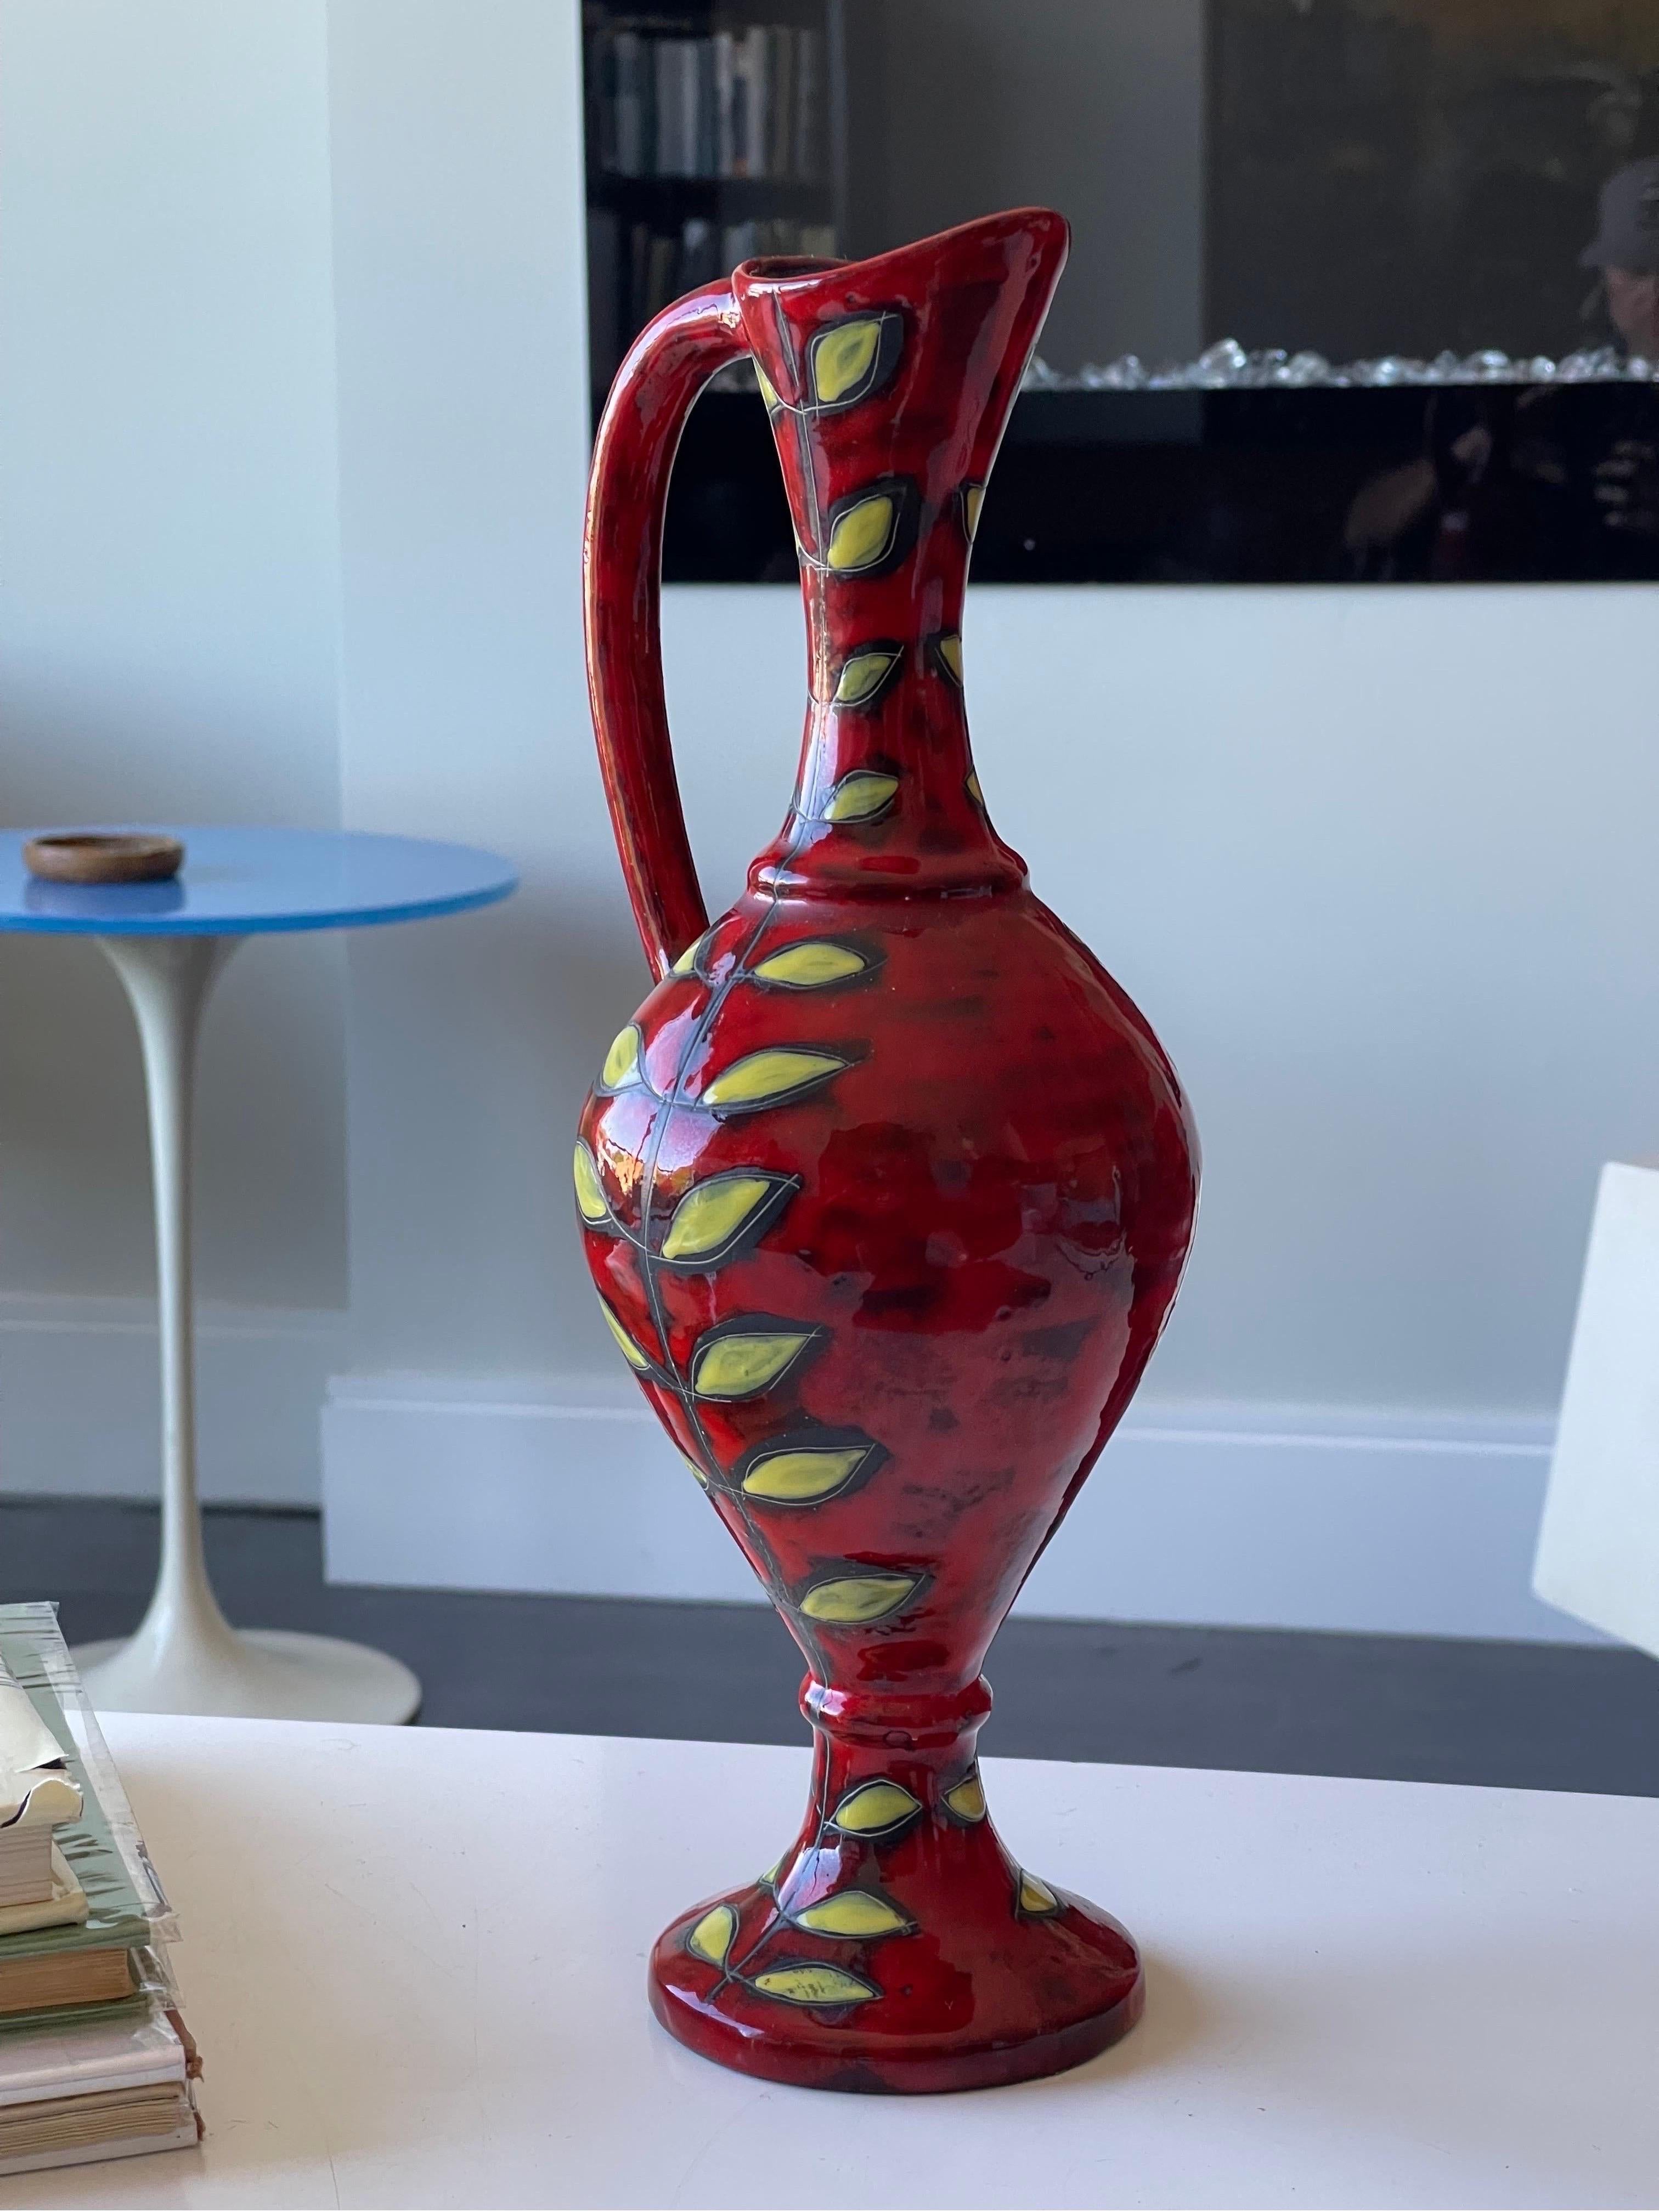 Exquisite Italian Ceramic Vase or Pitcher by Fantoni for Raymor For Sale 1